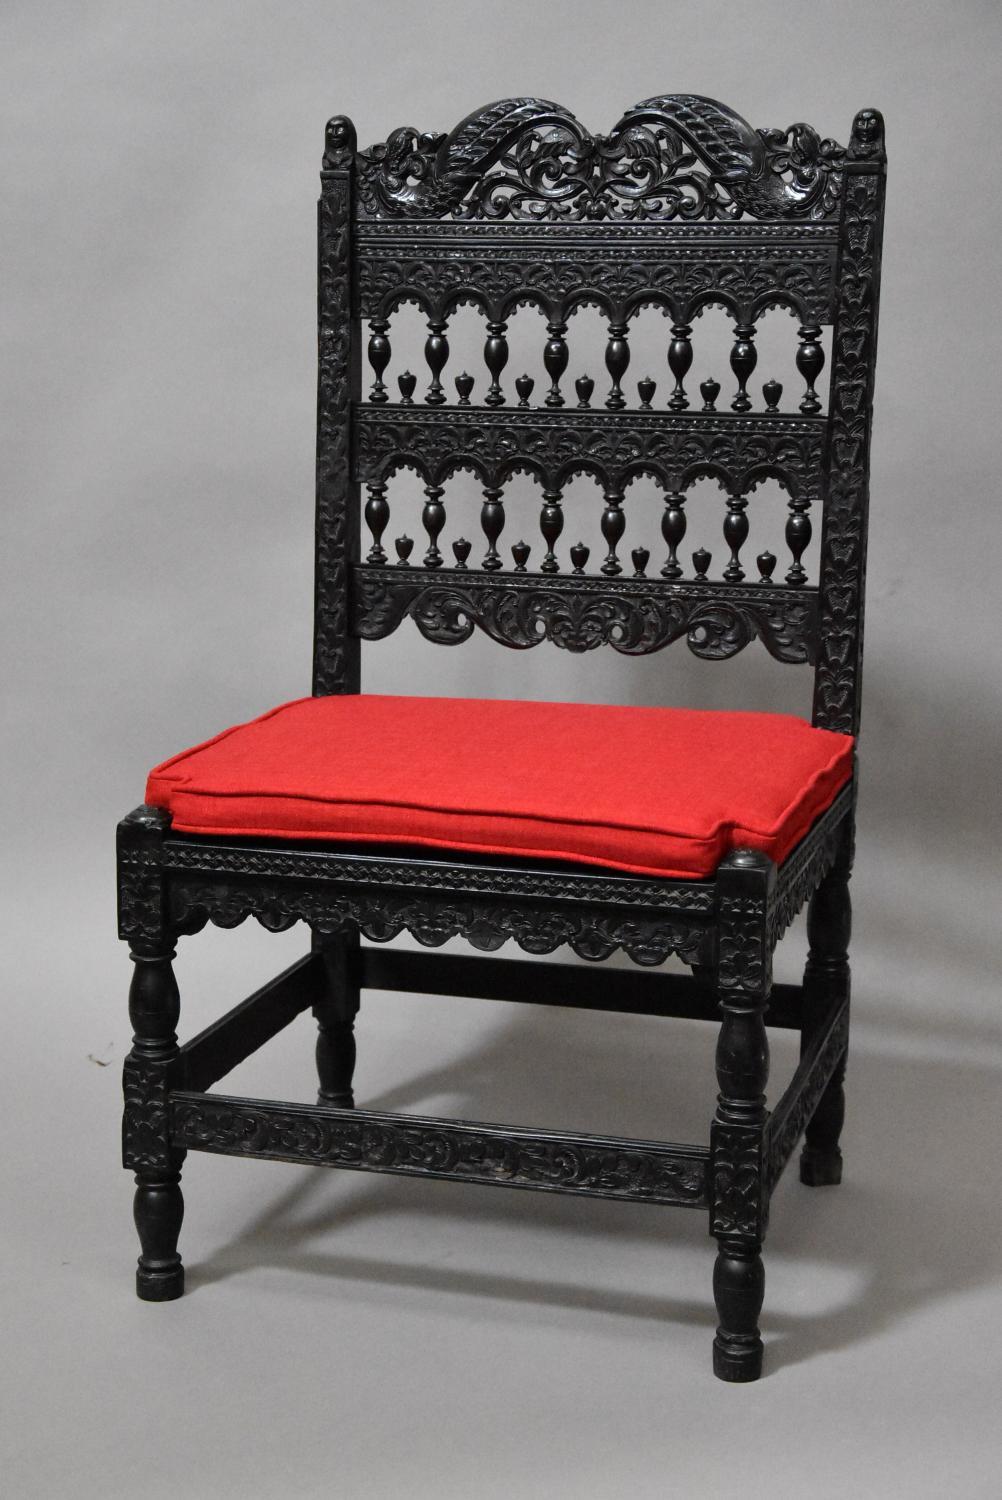 Superb quality late 17thc solid ebony chair